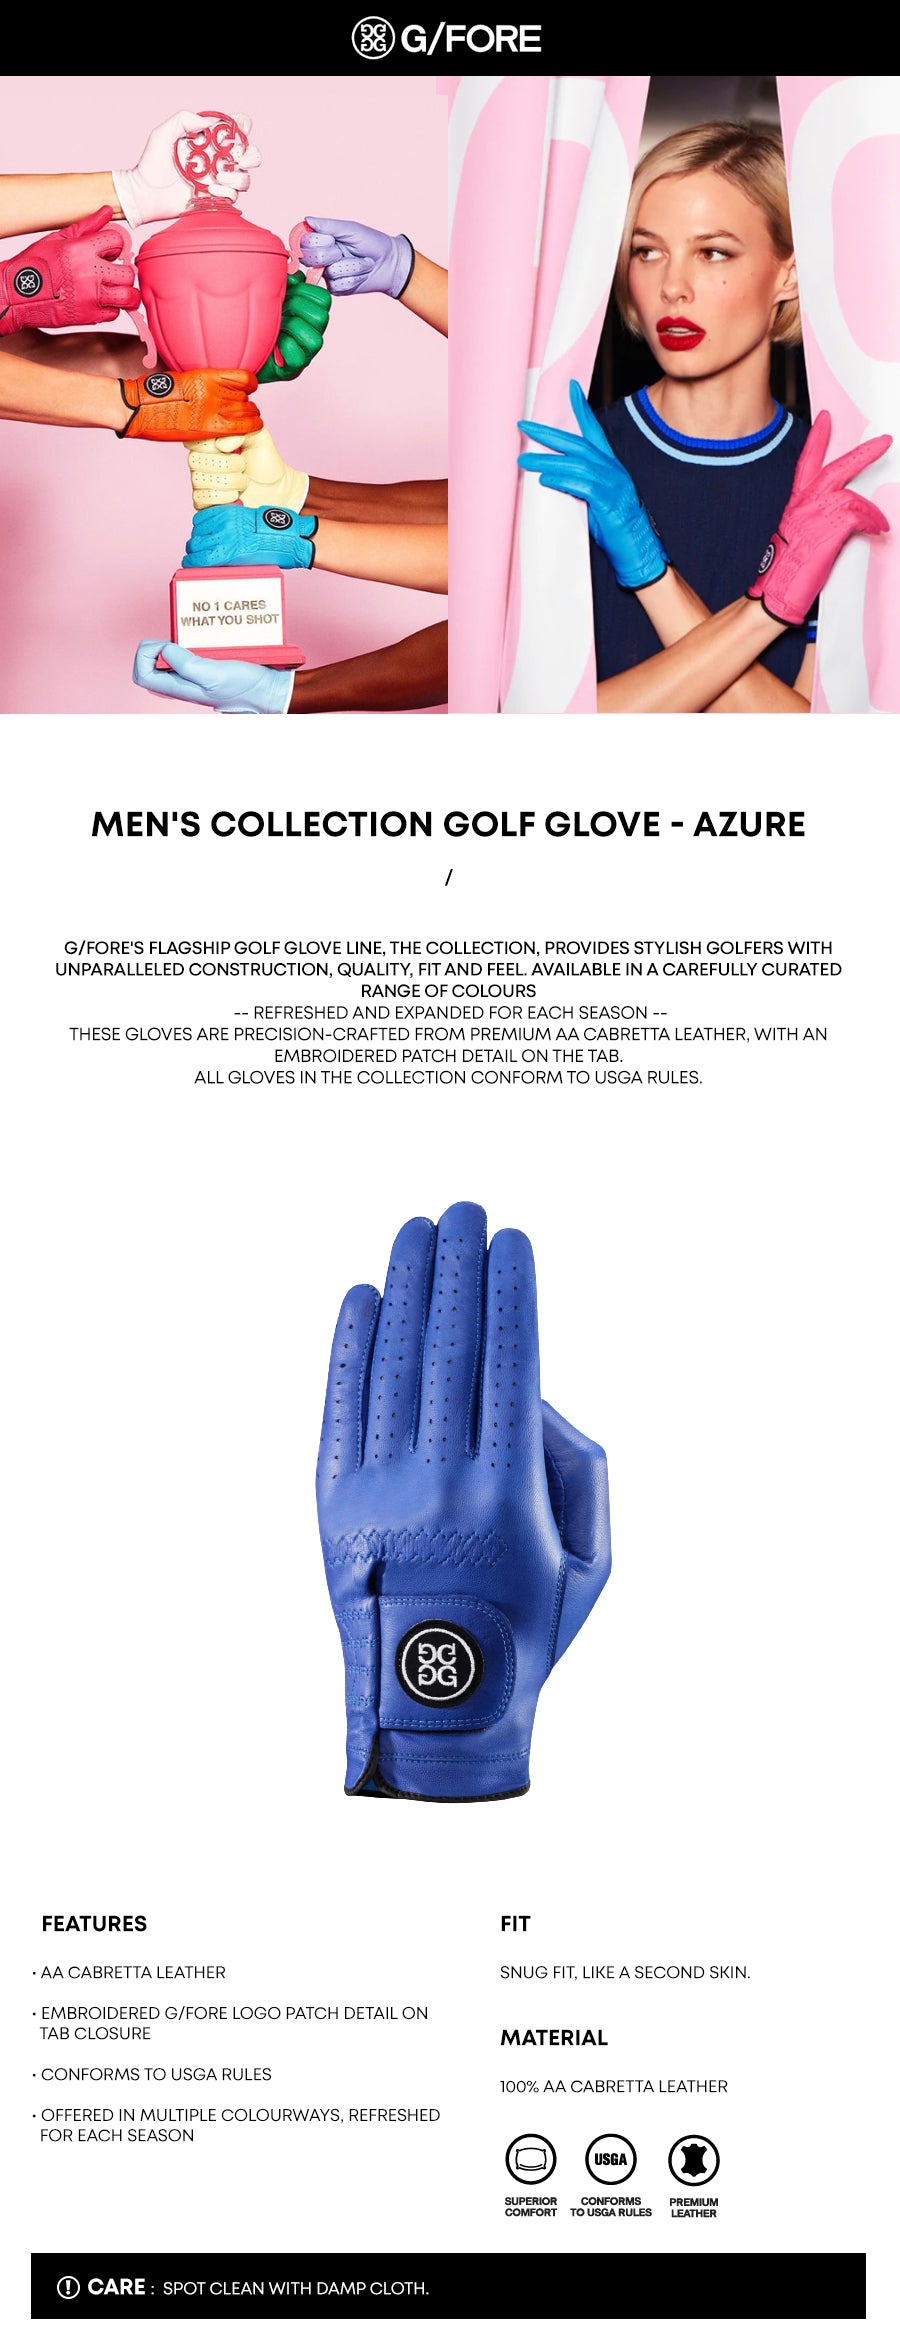 G/FORE-MEN'S-COLLECTION-GOLF-GLOVE-AZURE